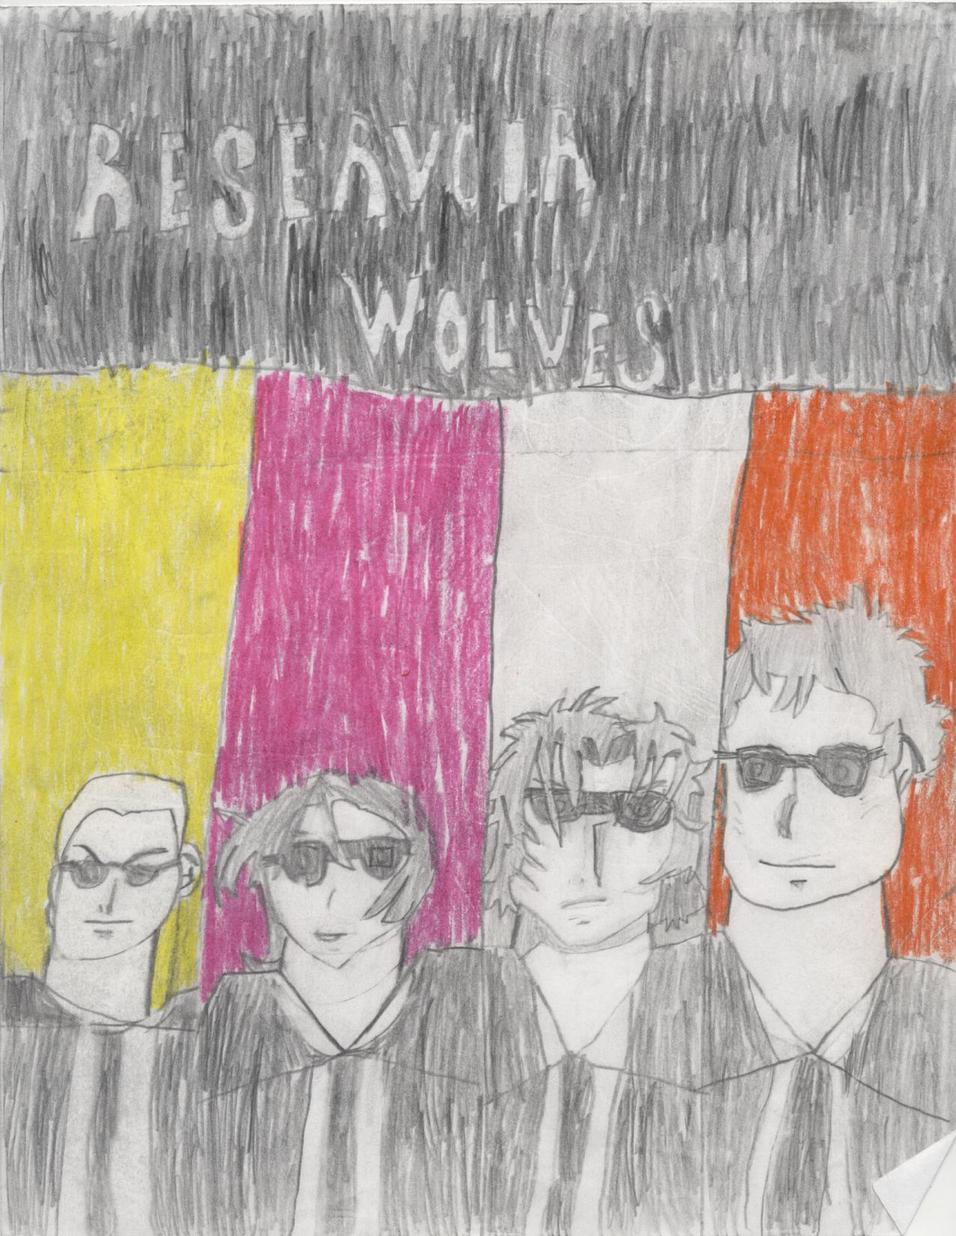 Reservoir Wolves by Whiskers